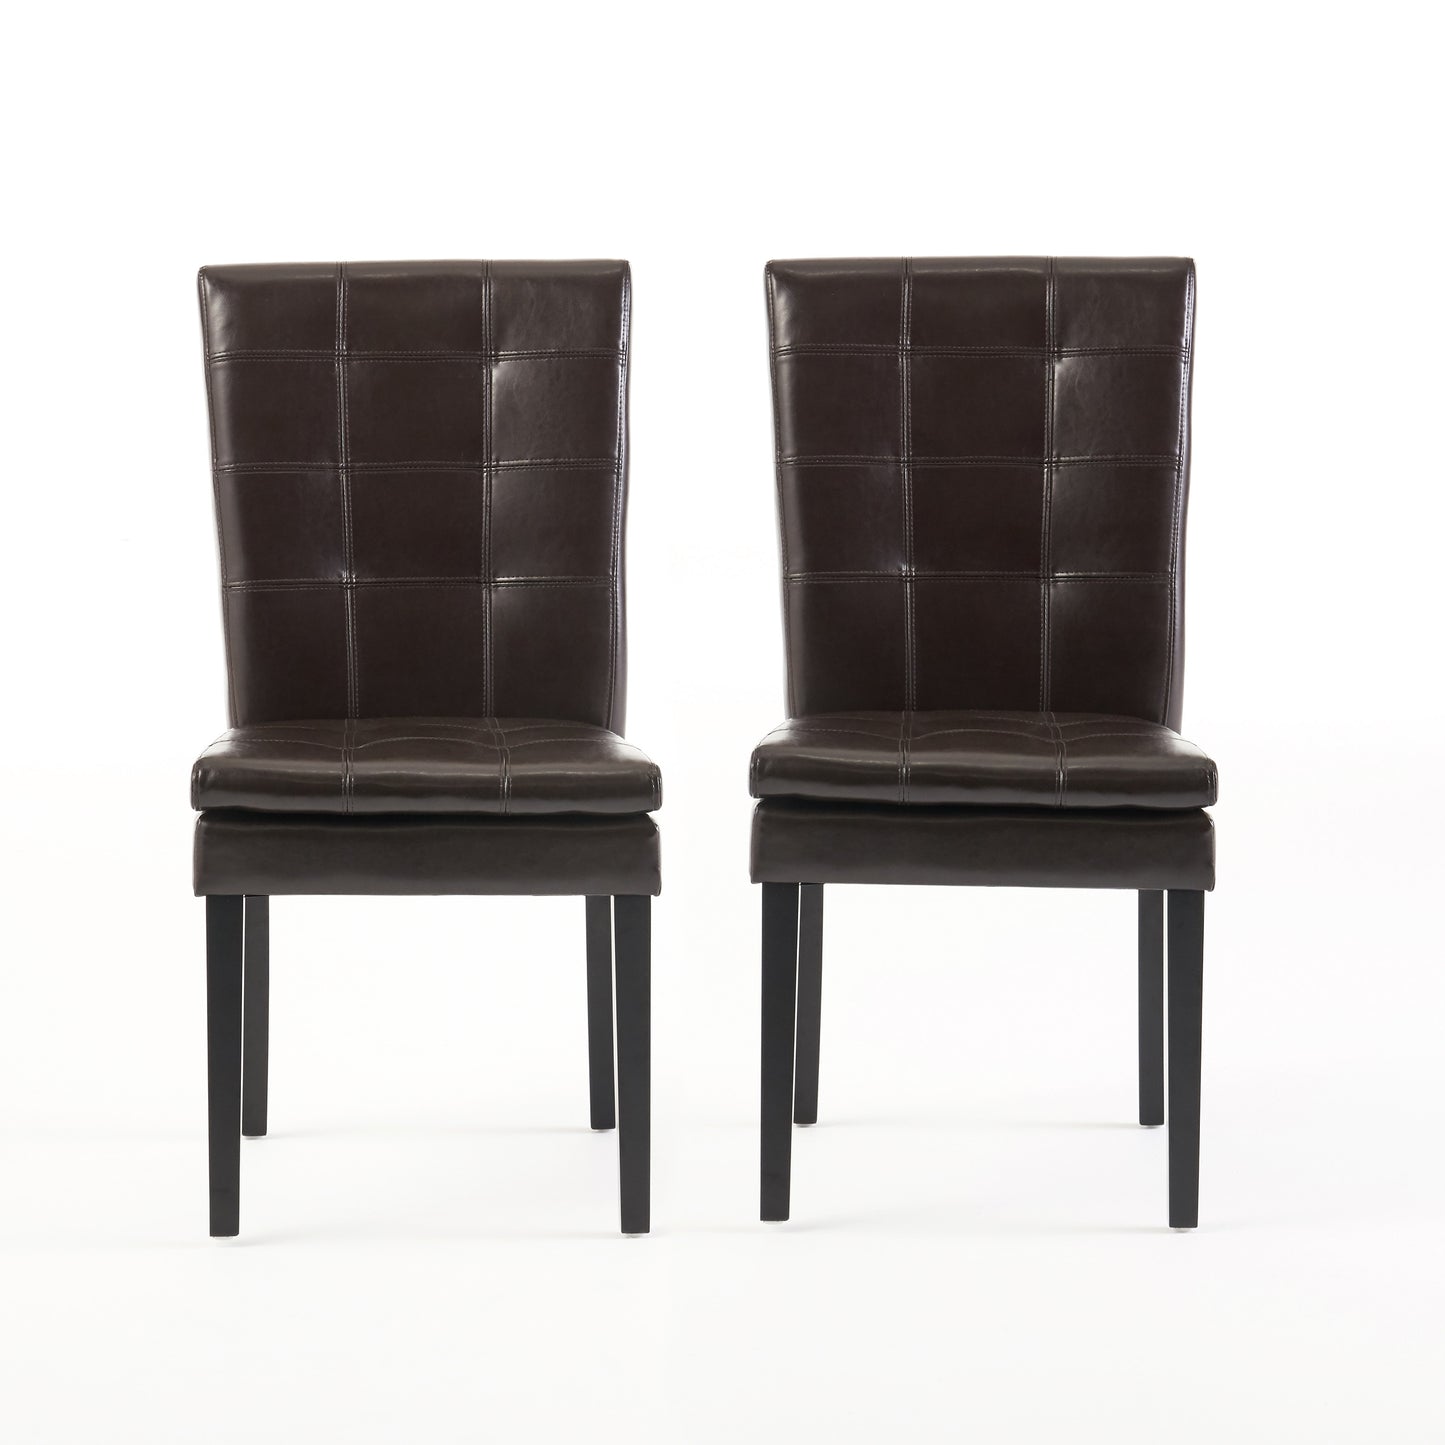 Barrington Contemporary Tufted Bonded Leather Dining Chairs (Set of 2)